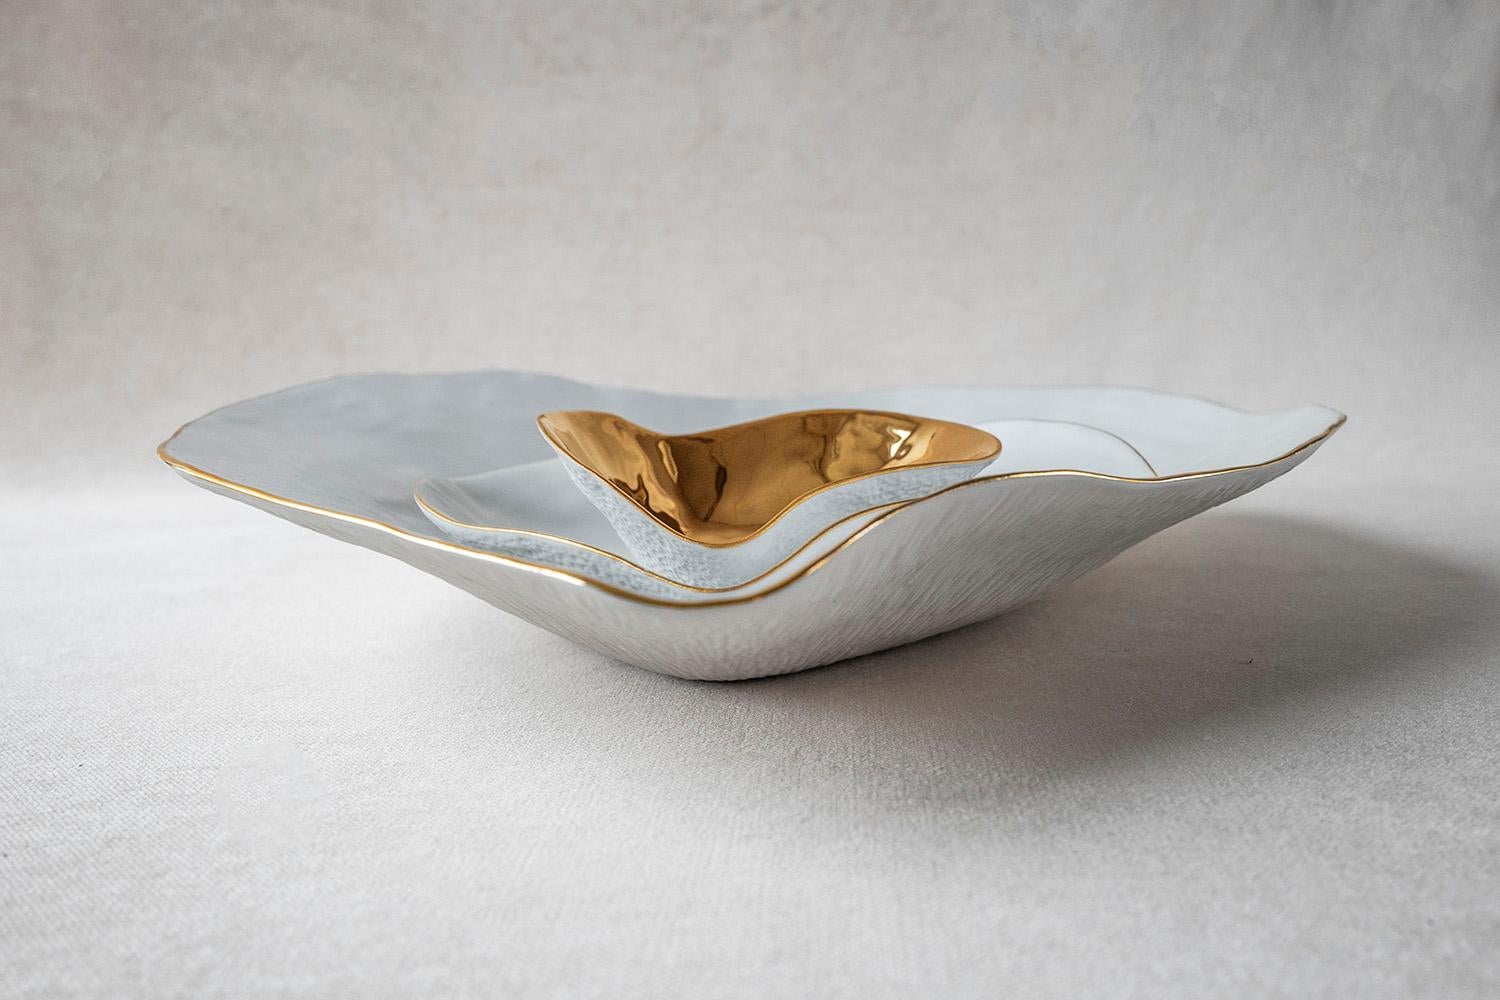 • Sensual dinner set with a golden touch
• measures 30cm x 29cm x 5,5cm and 18cm x 17cm x 4cm and 10,5cm x 11cm x 4,7cm 
• perfect to present 1 fabulous dish or an of array different courses
• 2 pieces are glazed white with a very luxurious